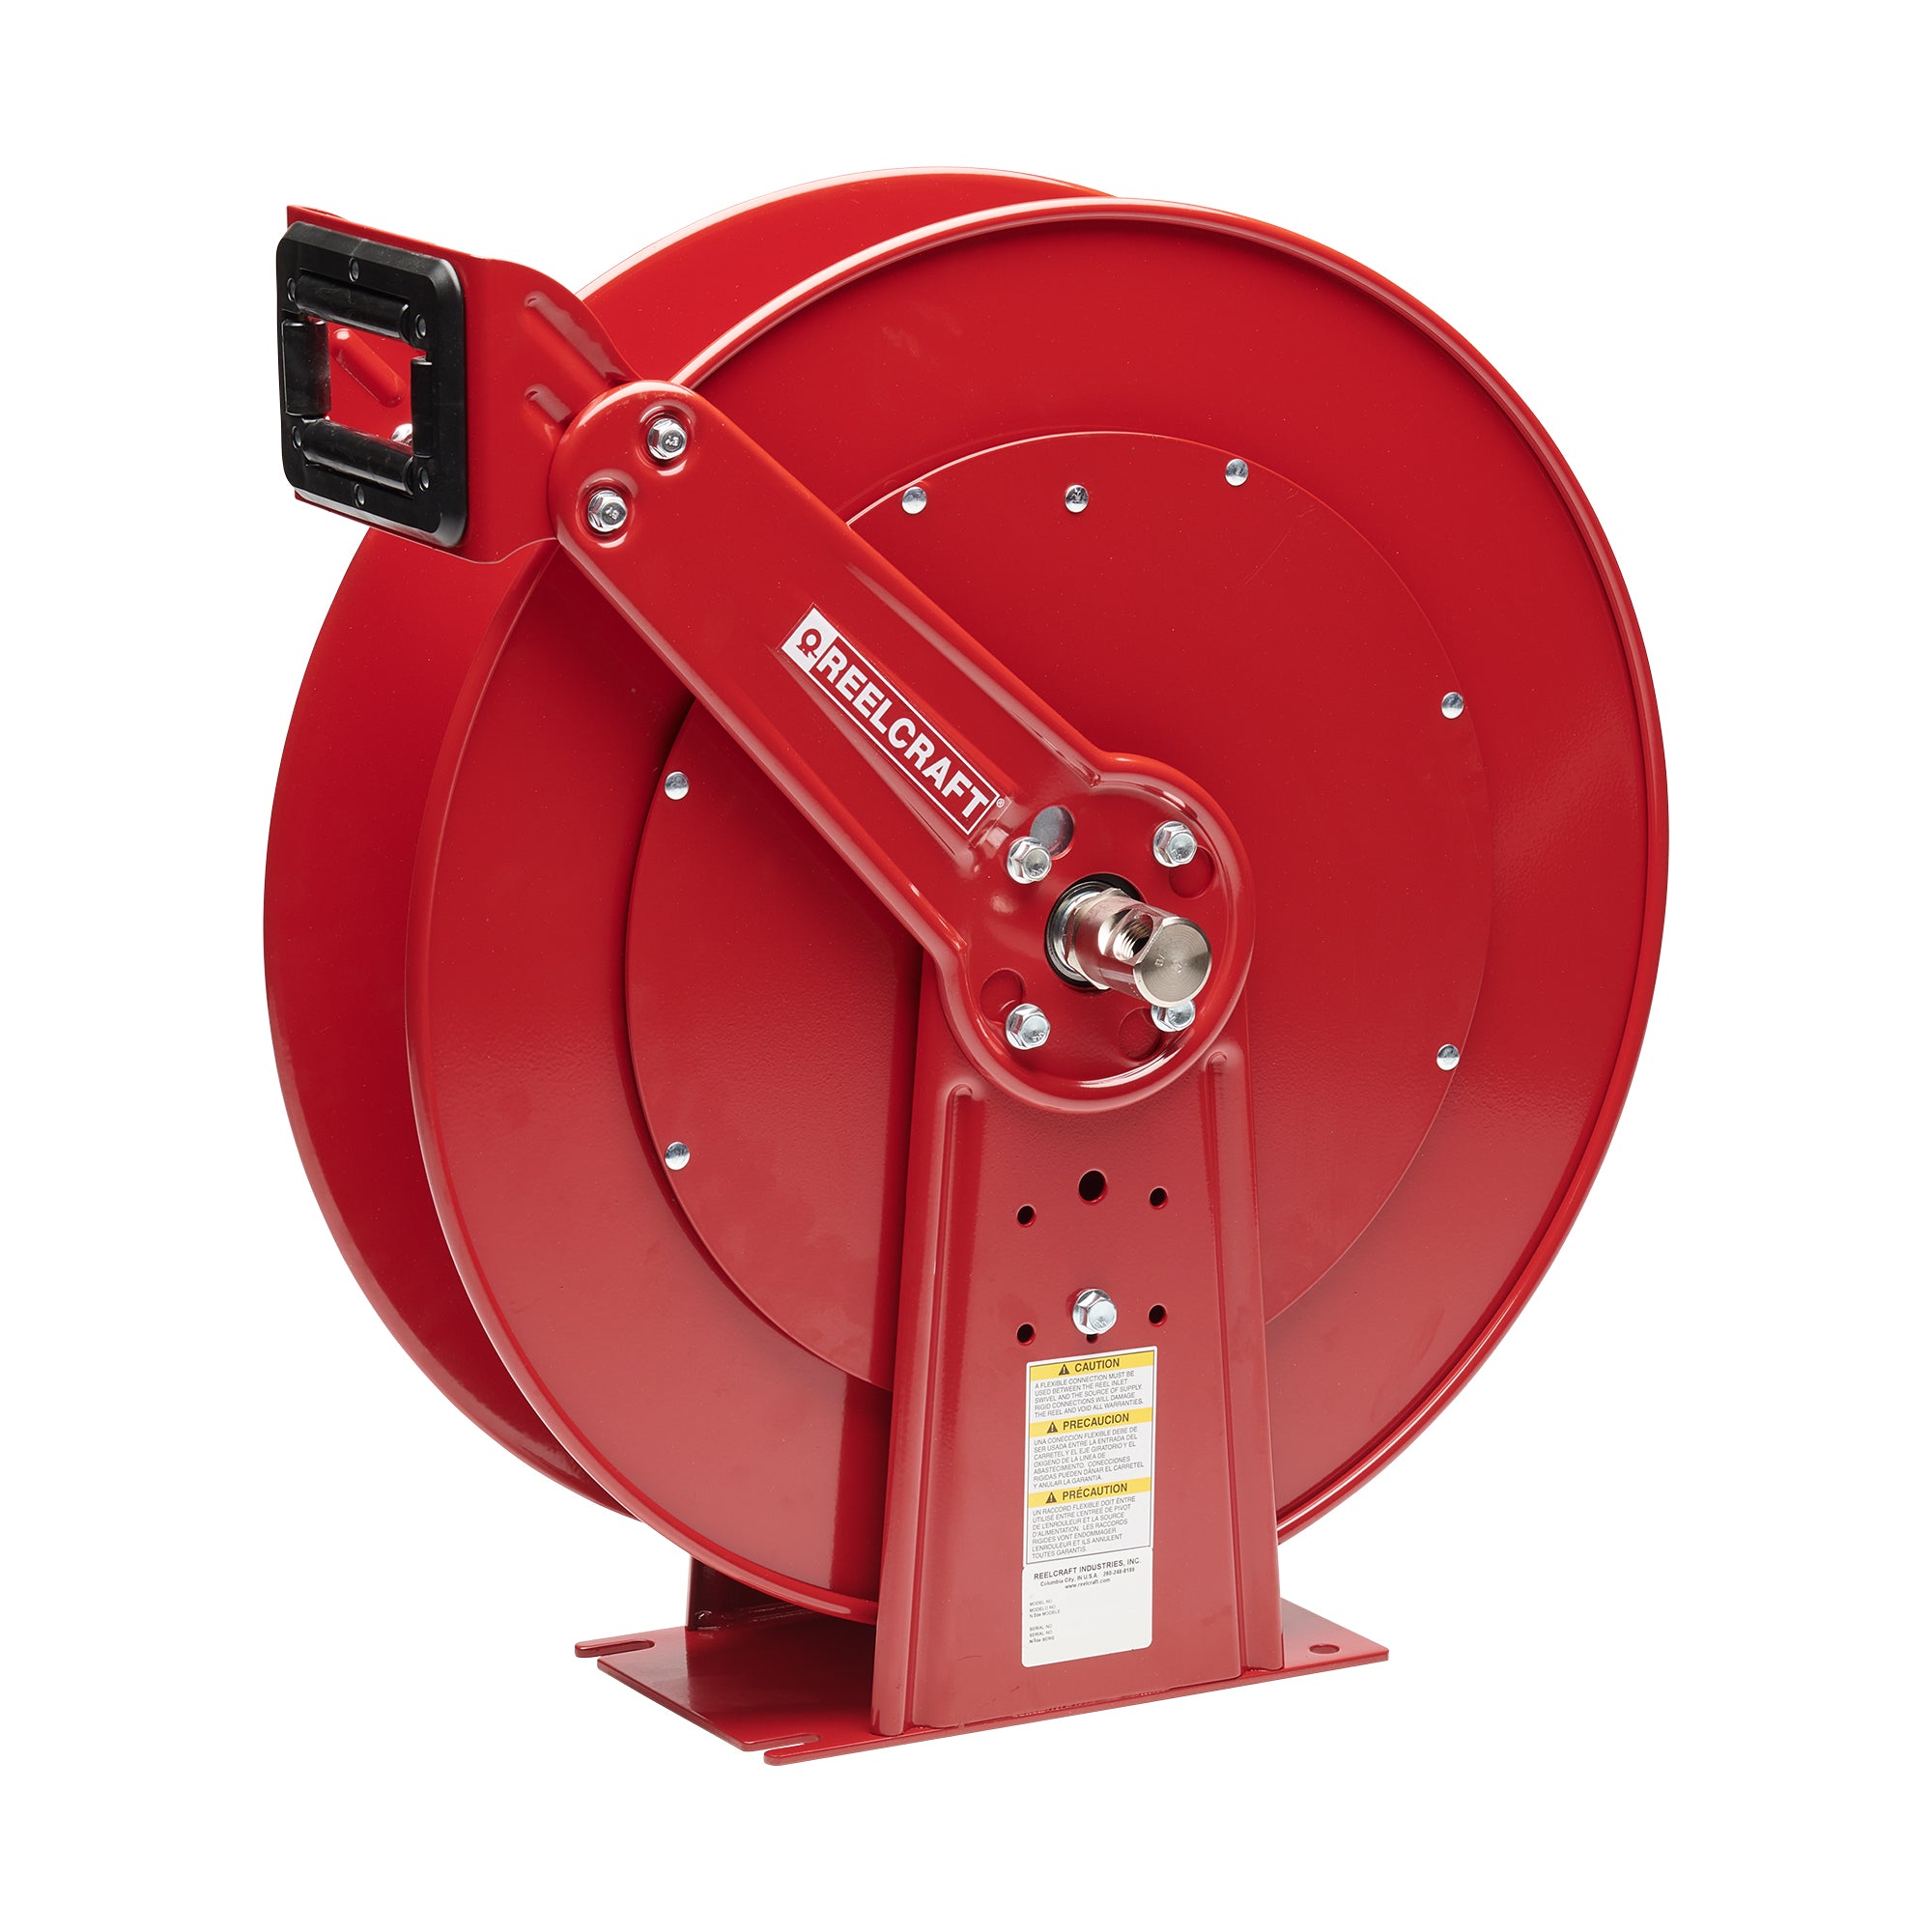 Reelcraft PW81000 OHP 3/8 in x 100 ft Premium Duty Pressure Wash Hose Reel - MPR Tools & Equipment